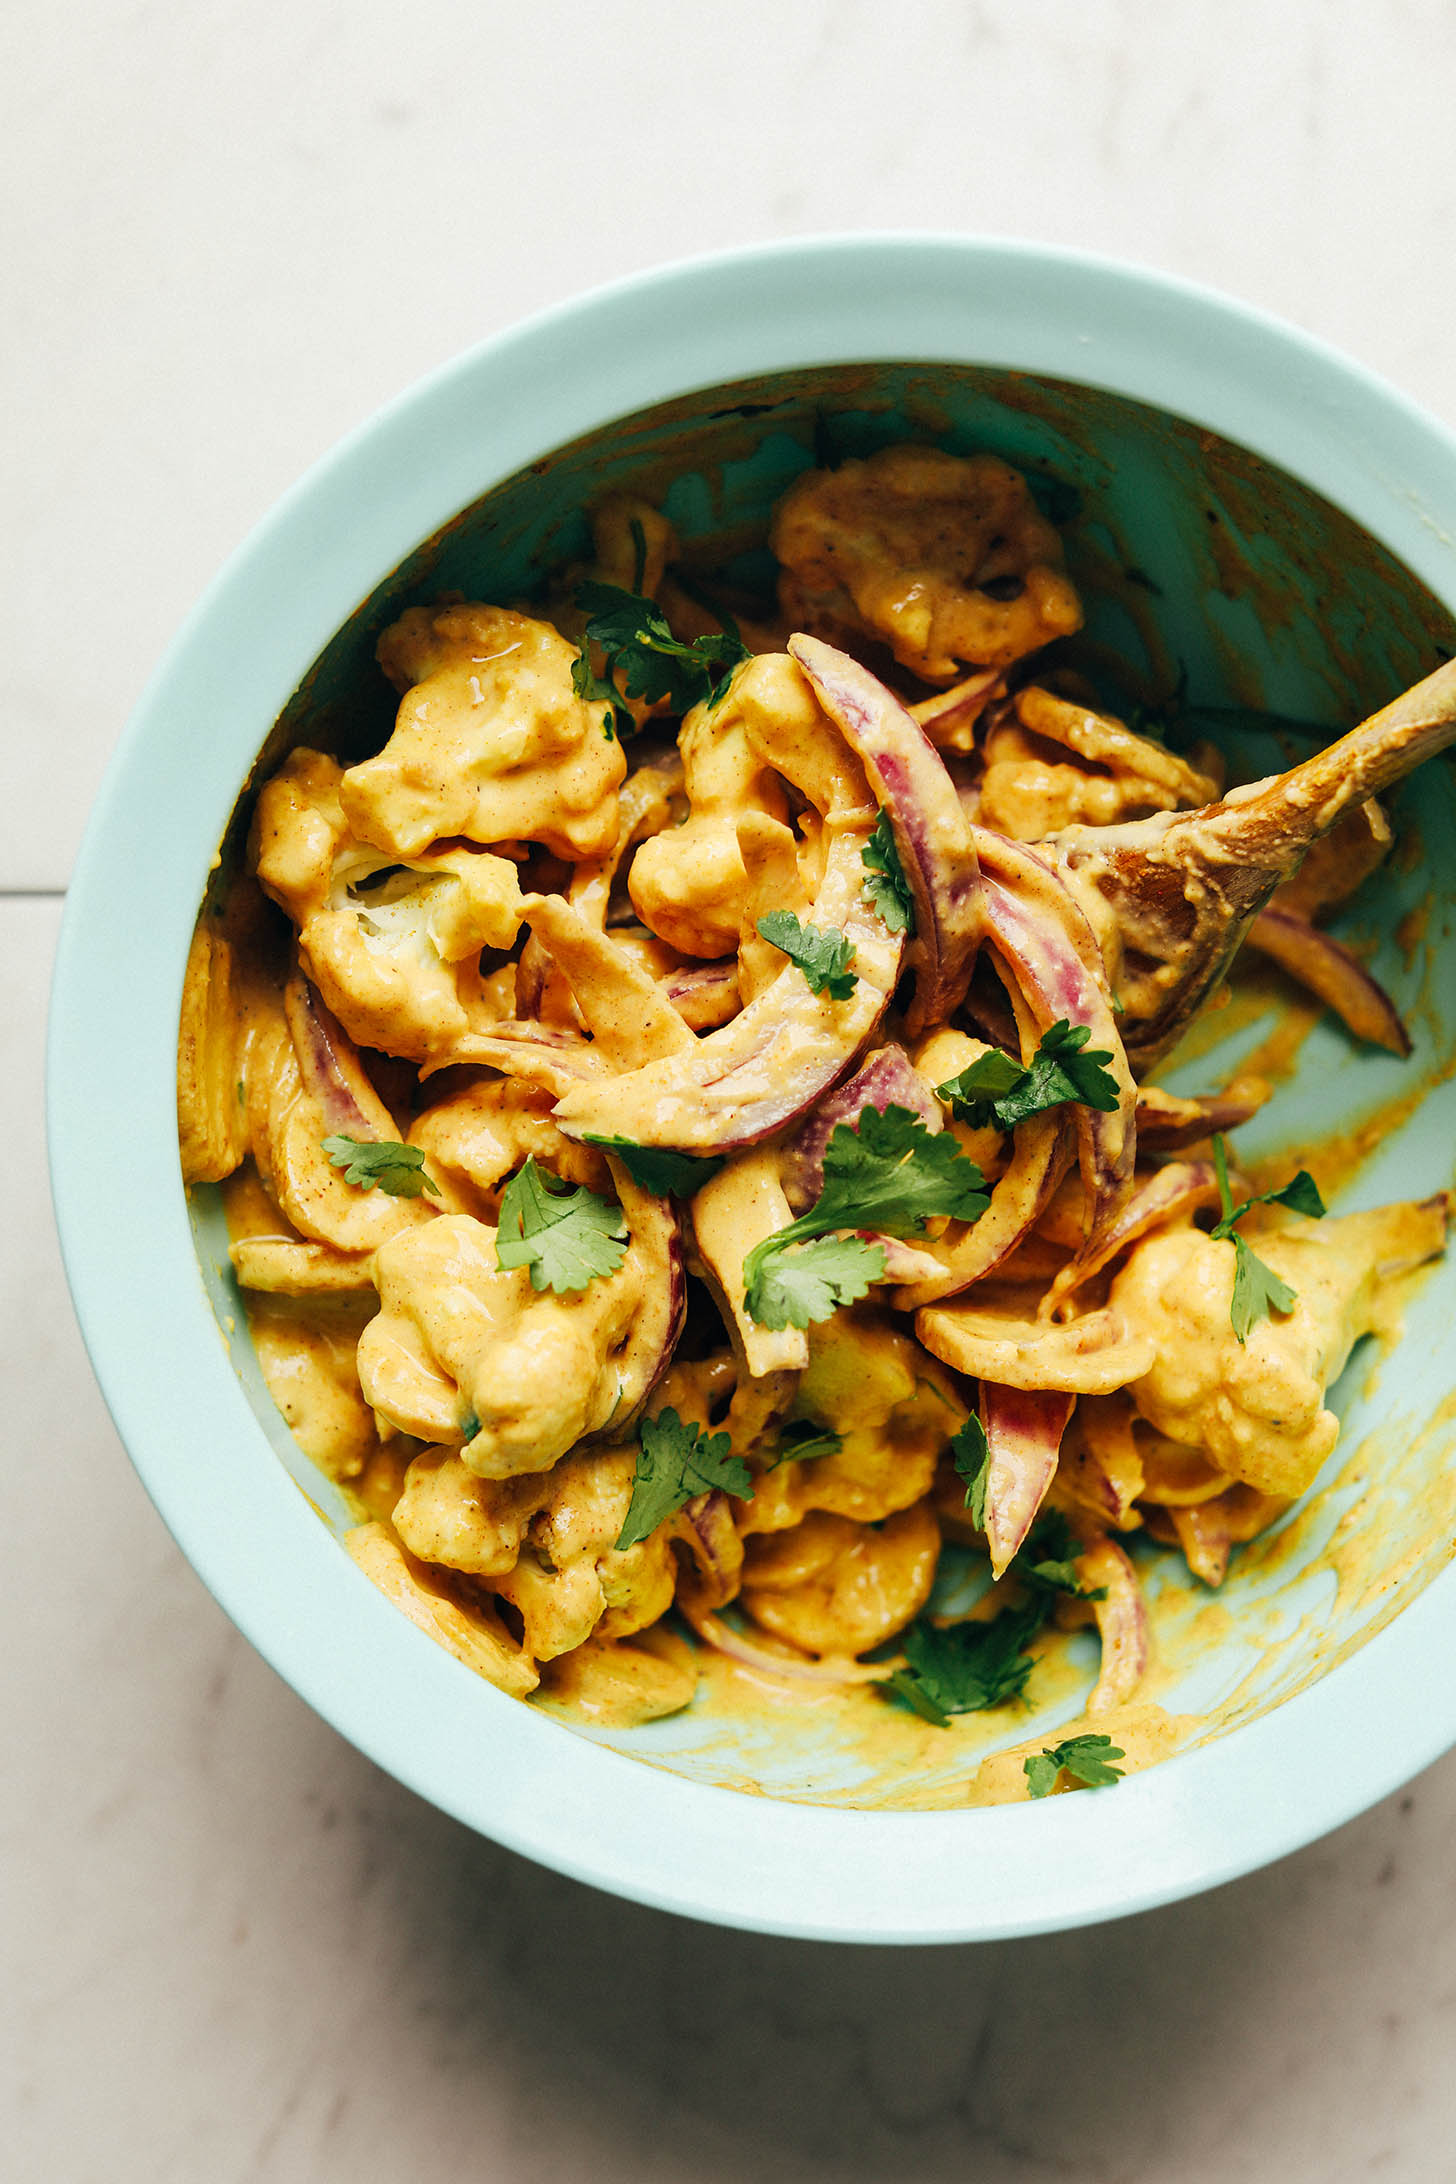 Using a wooden spoon to coat vegetables with sauce for plant-based Vegetable Pakoras